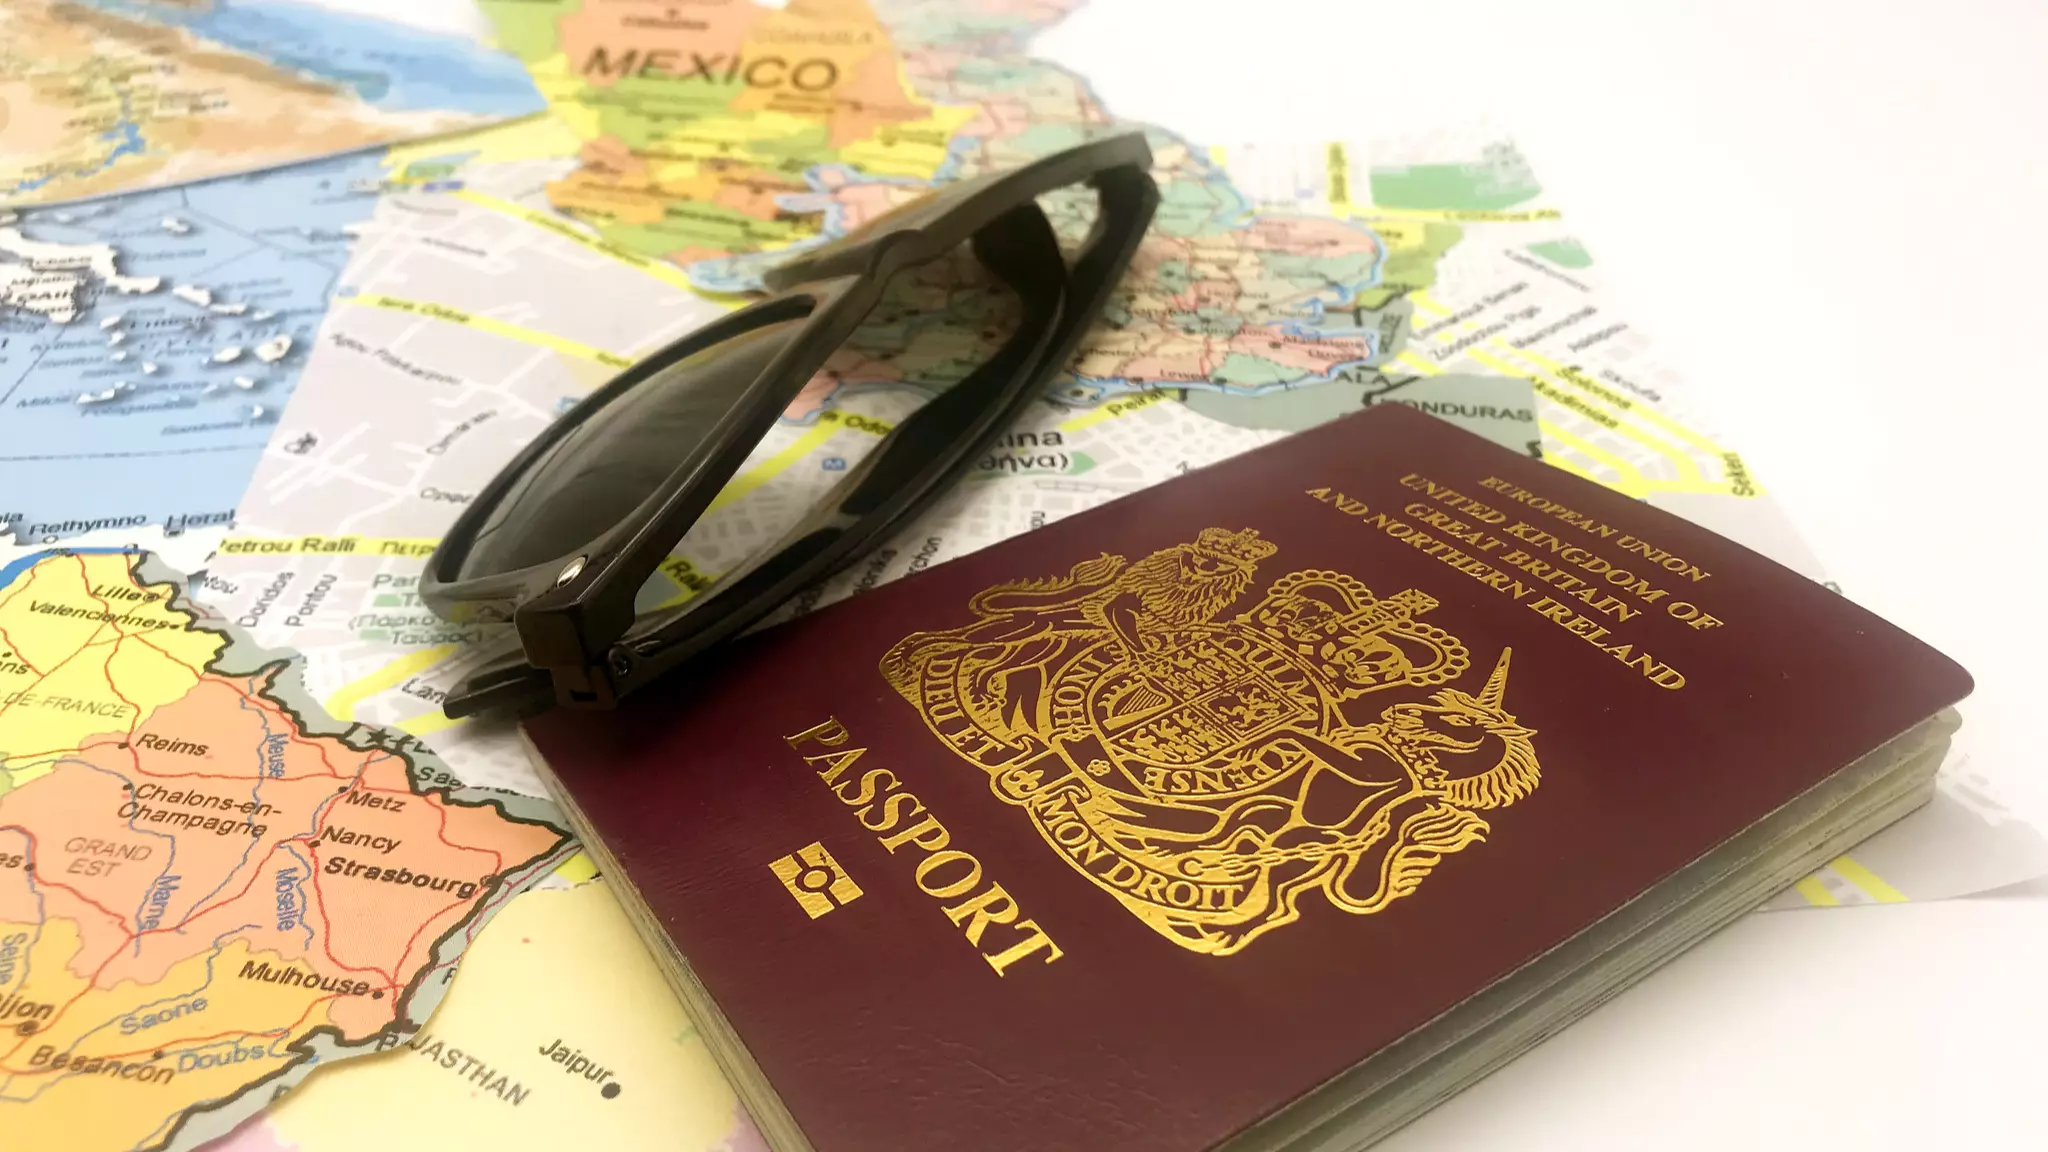 Travel Agent Issues Warning To Brits Who Have A Red Passport